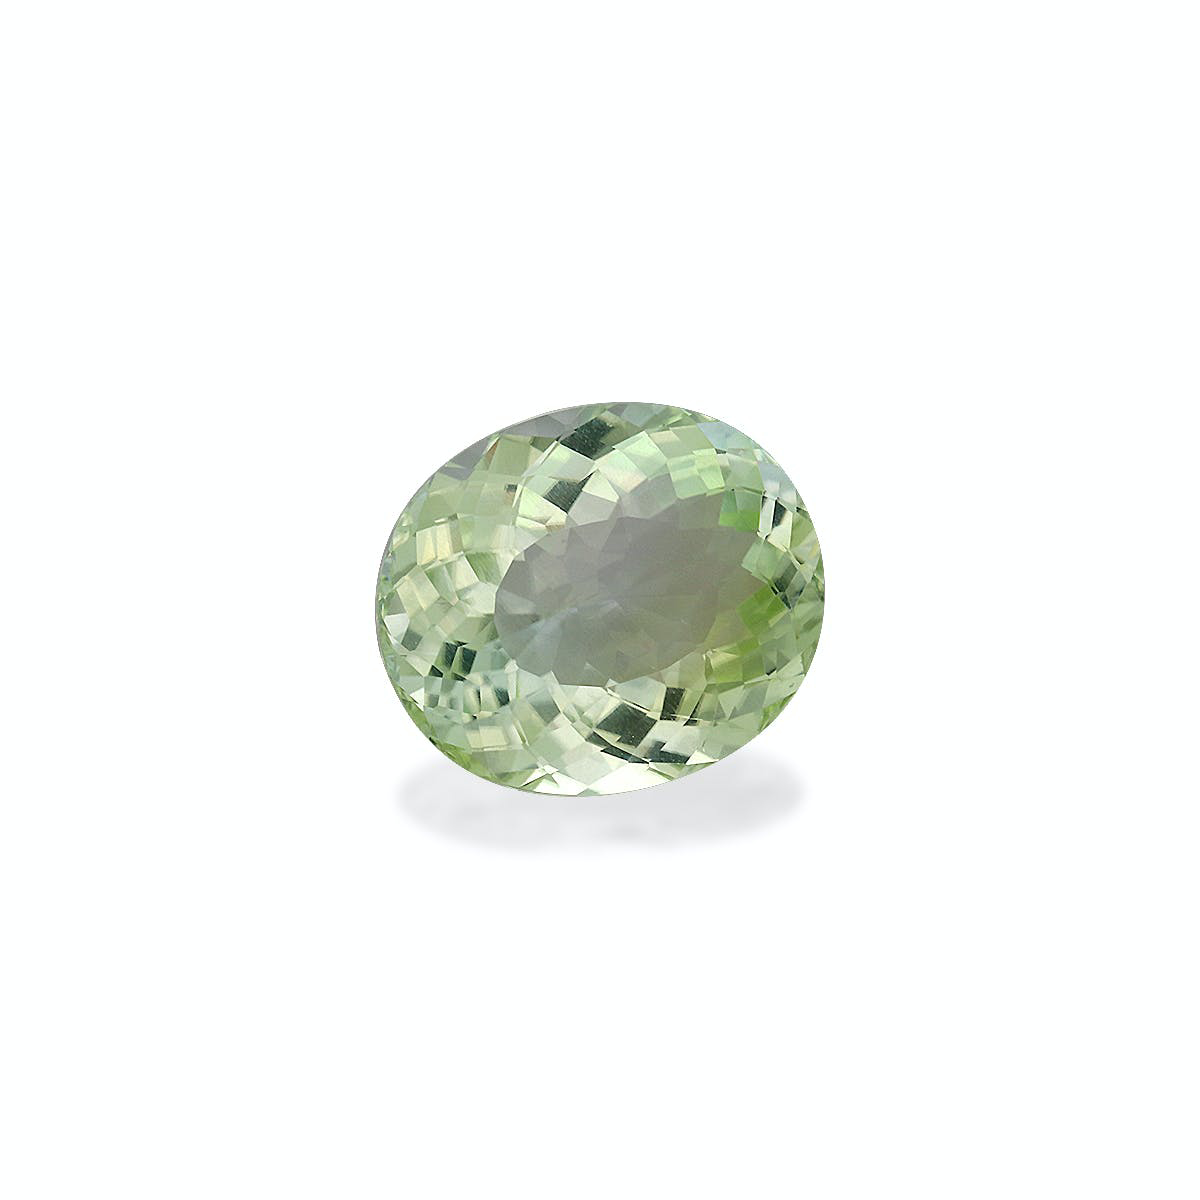 Picture of Pale Green Cuprian Tourmaline 7.91ct - 14x12mm (MZ0219)